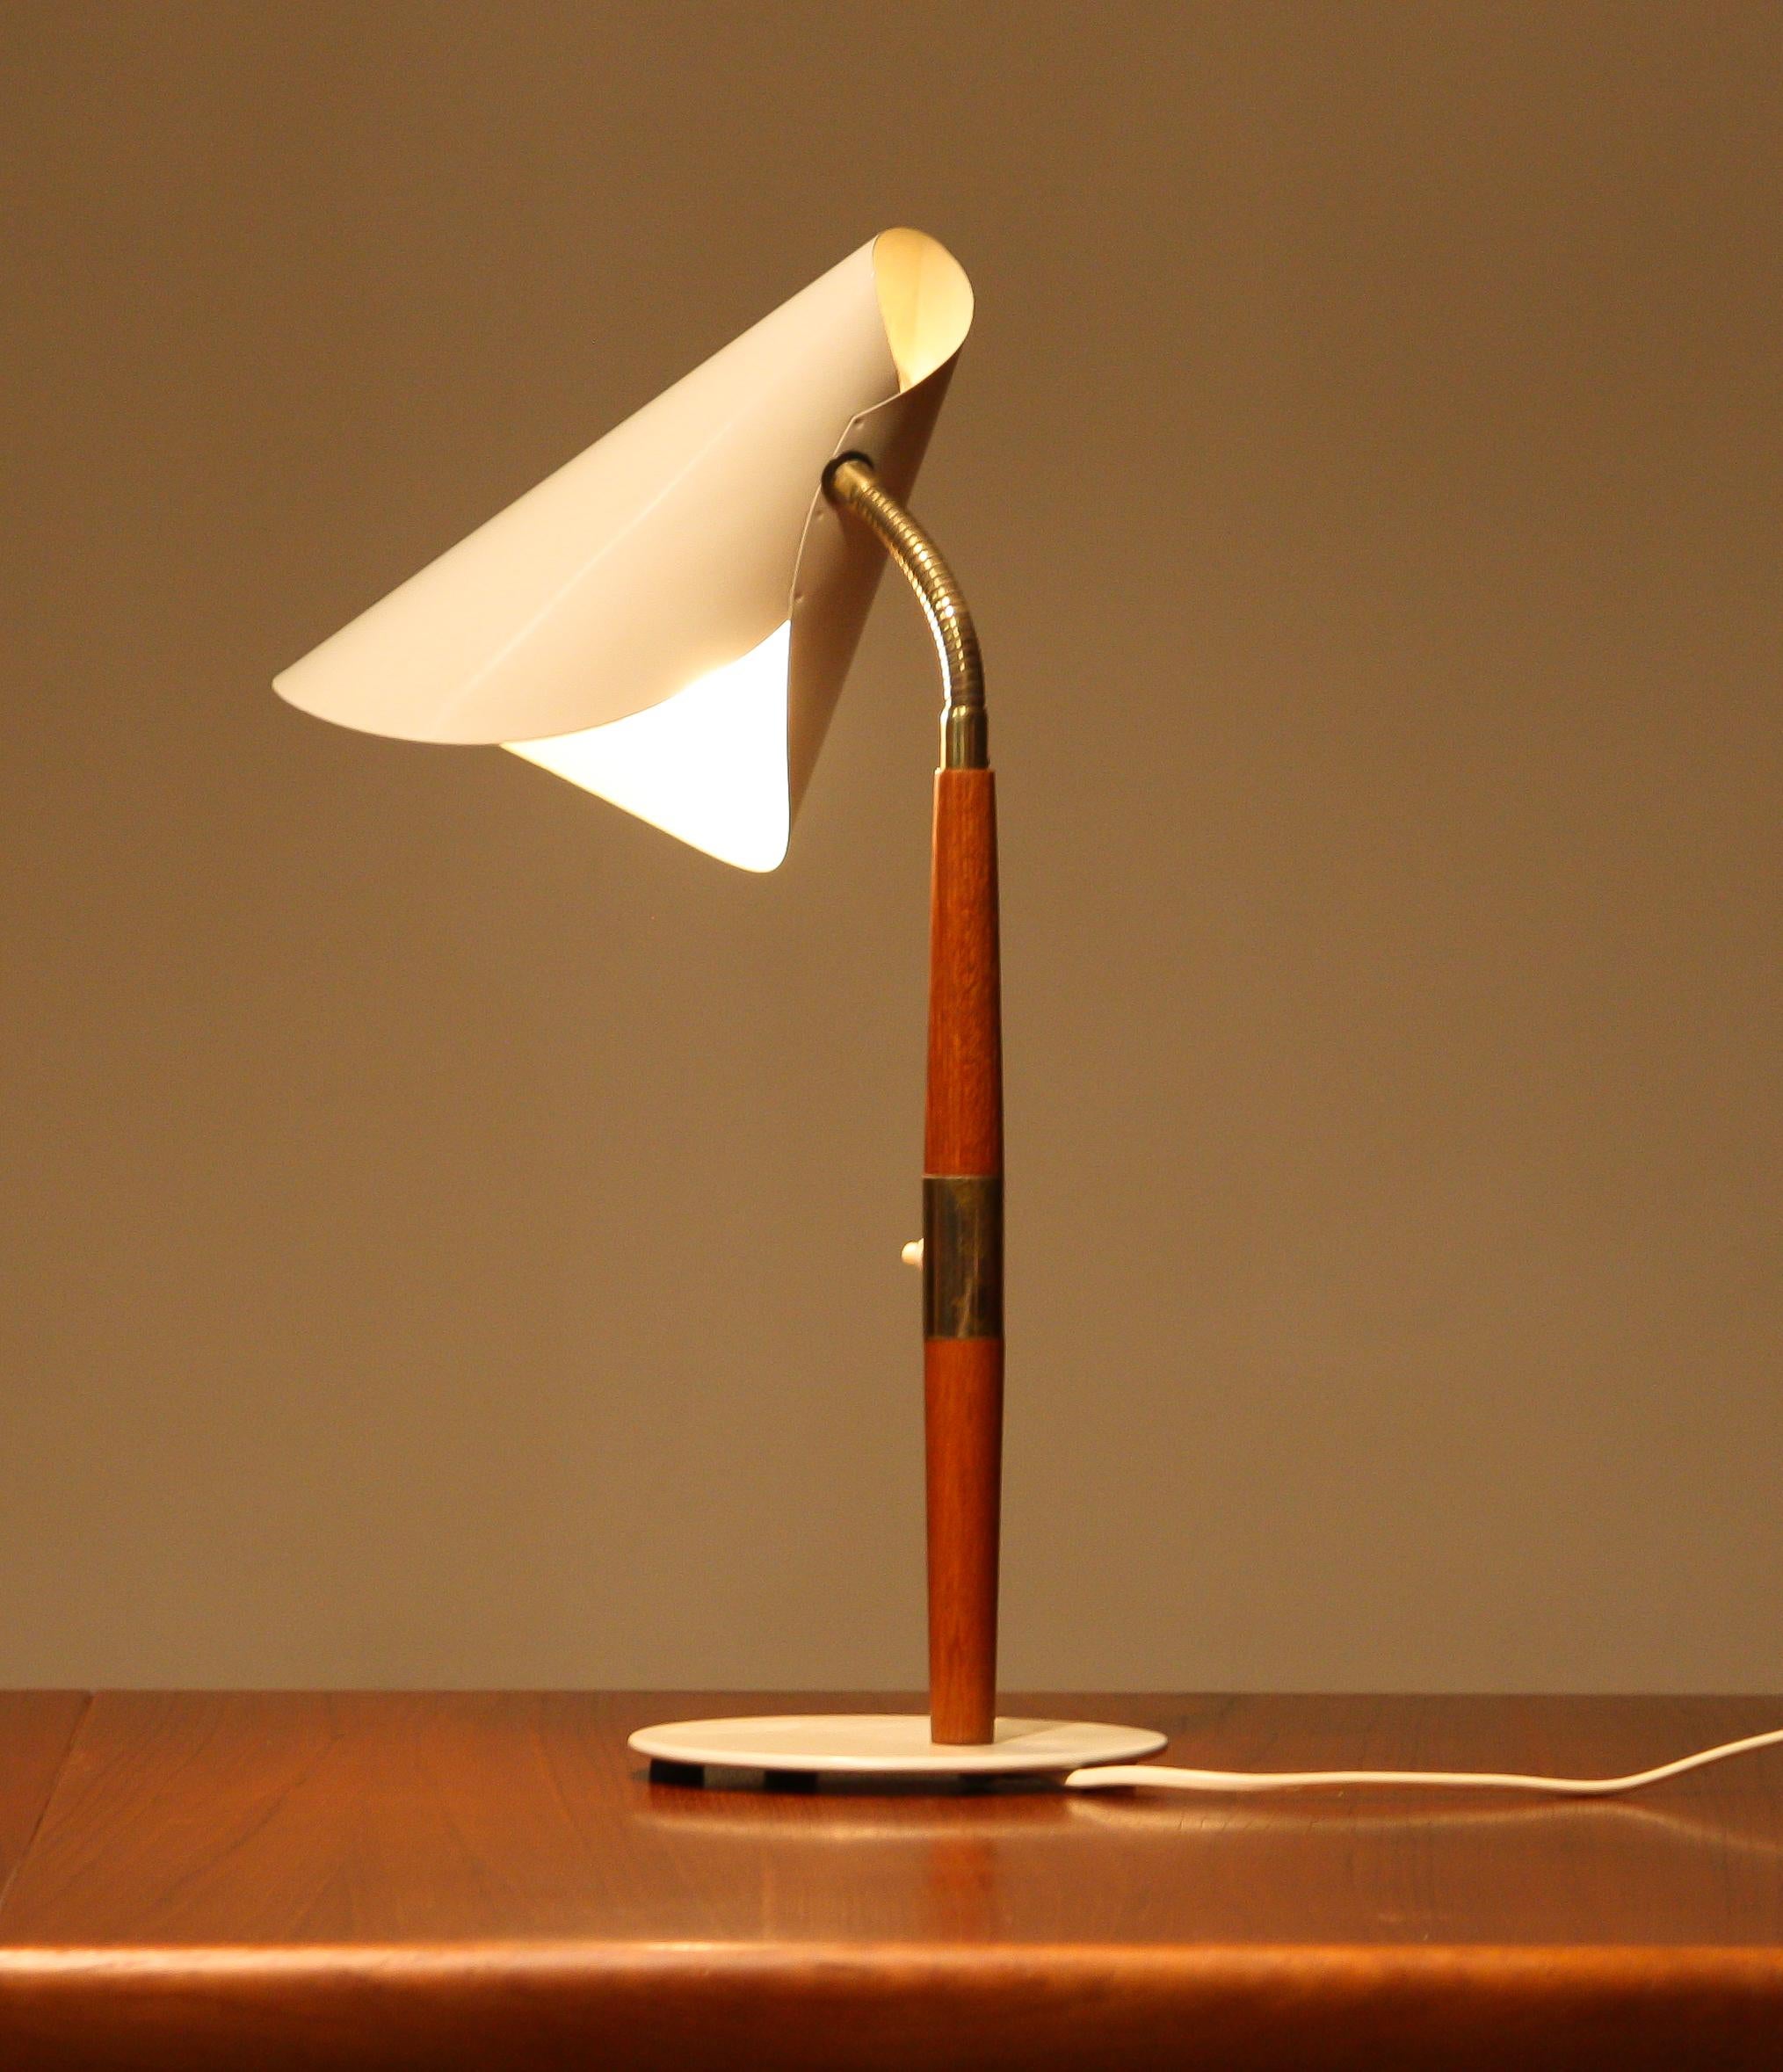 1960s, Off White with Teak and Brass Elements Desk or Table Lamp by Karlskrona In Good Condition In Silvolde, Gelderland